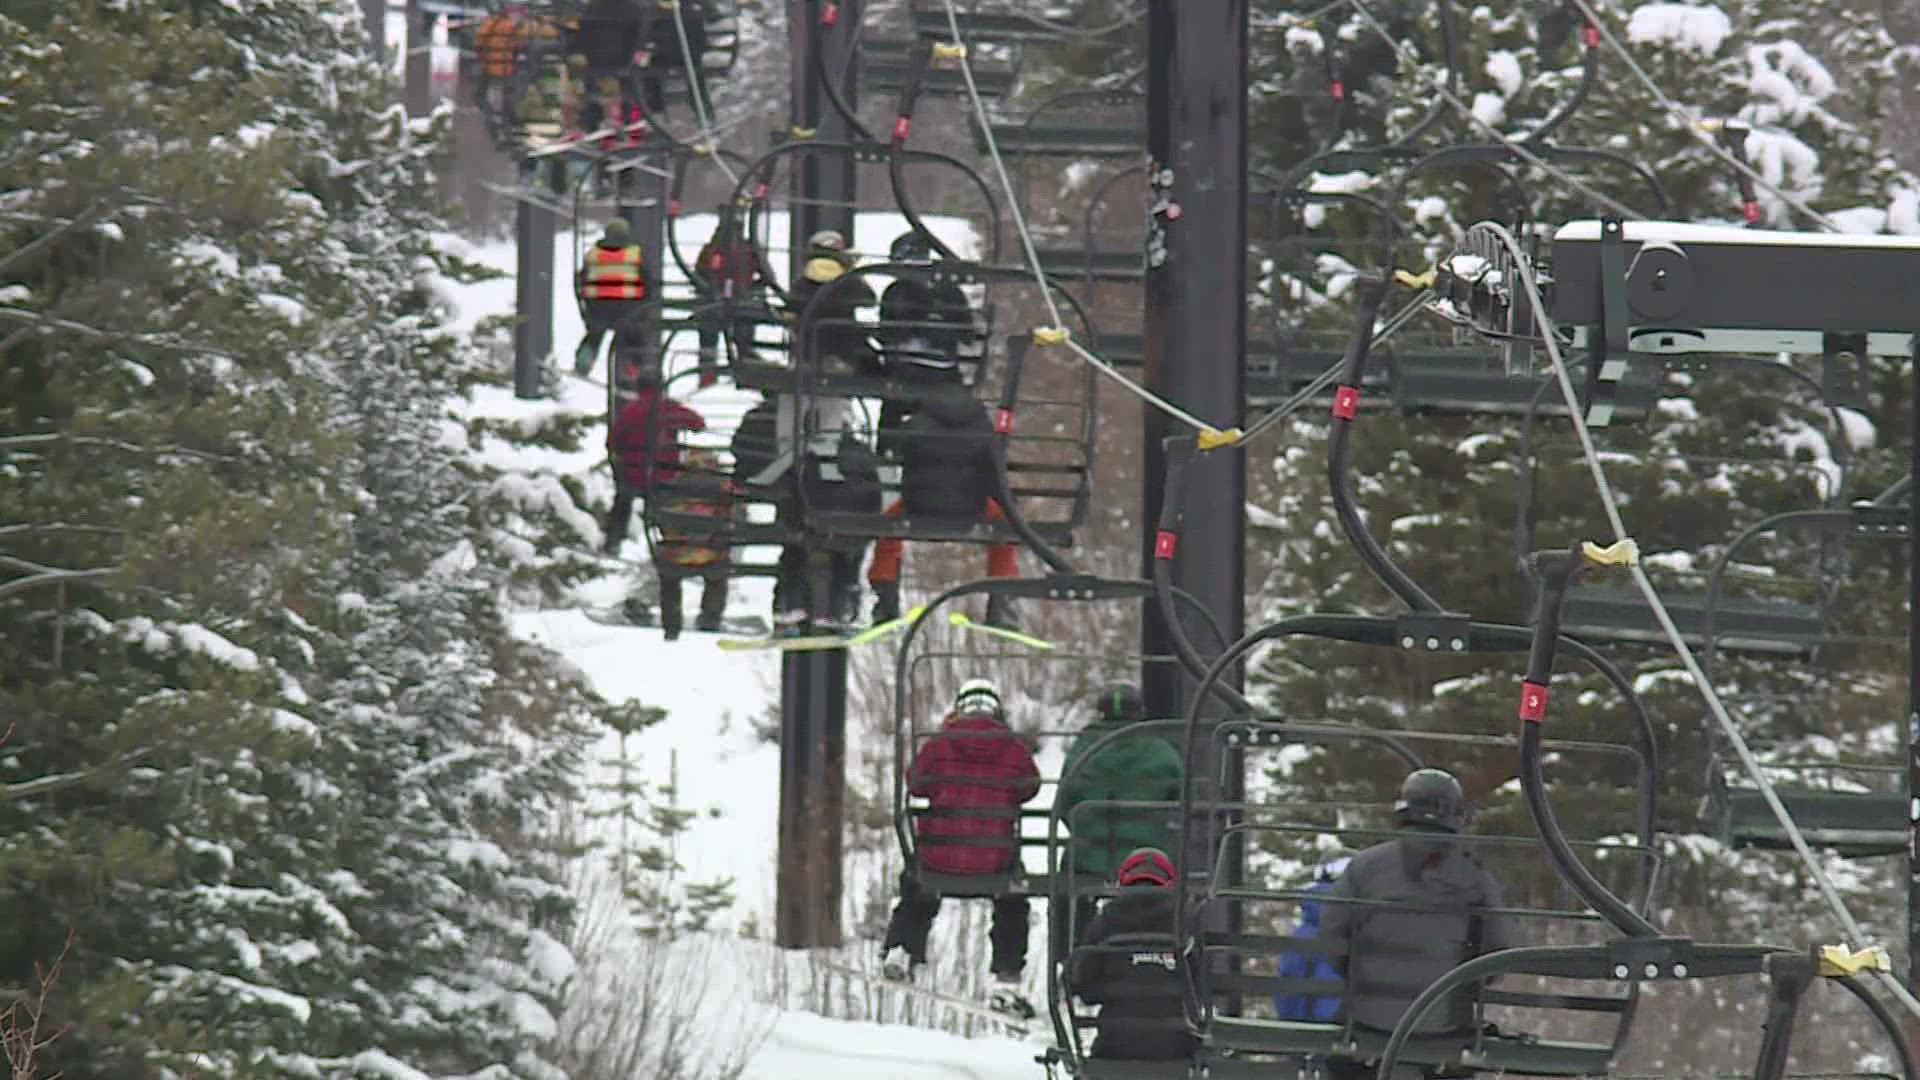 Winter Park Resort also says they put more emphasis on an early opening.